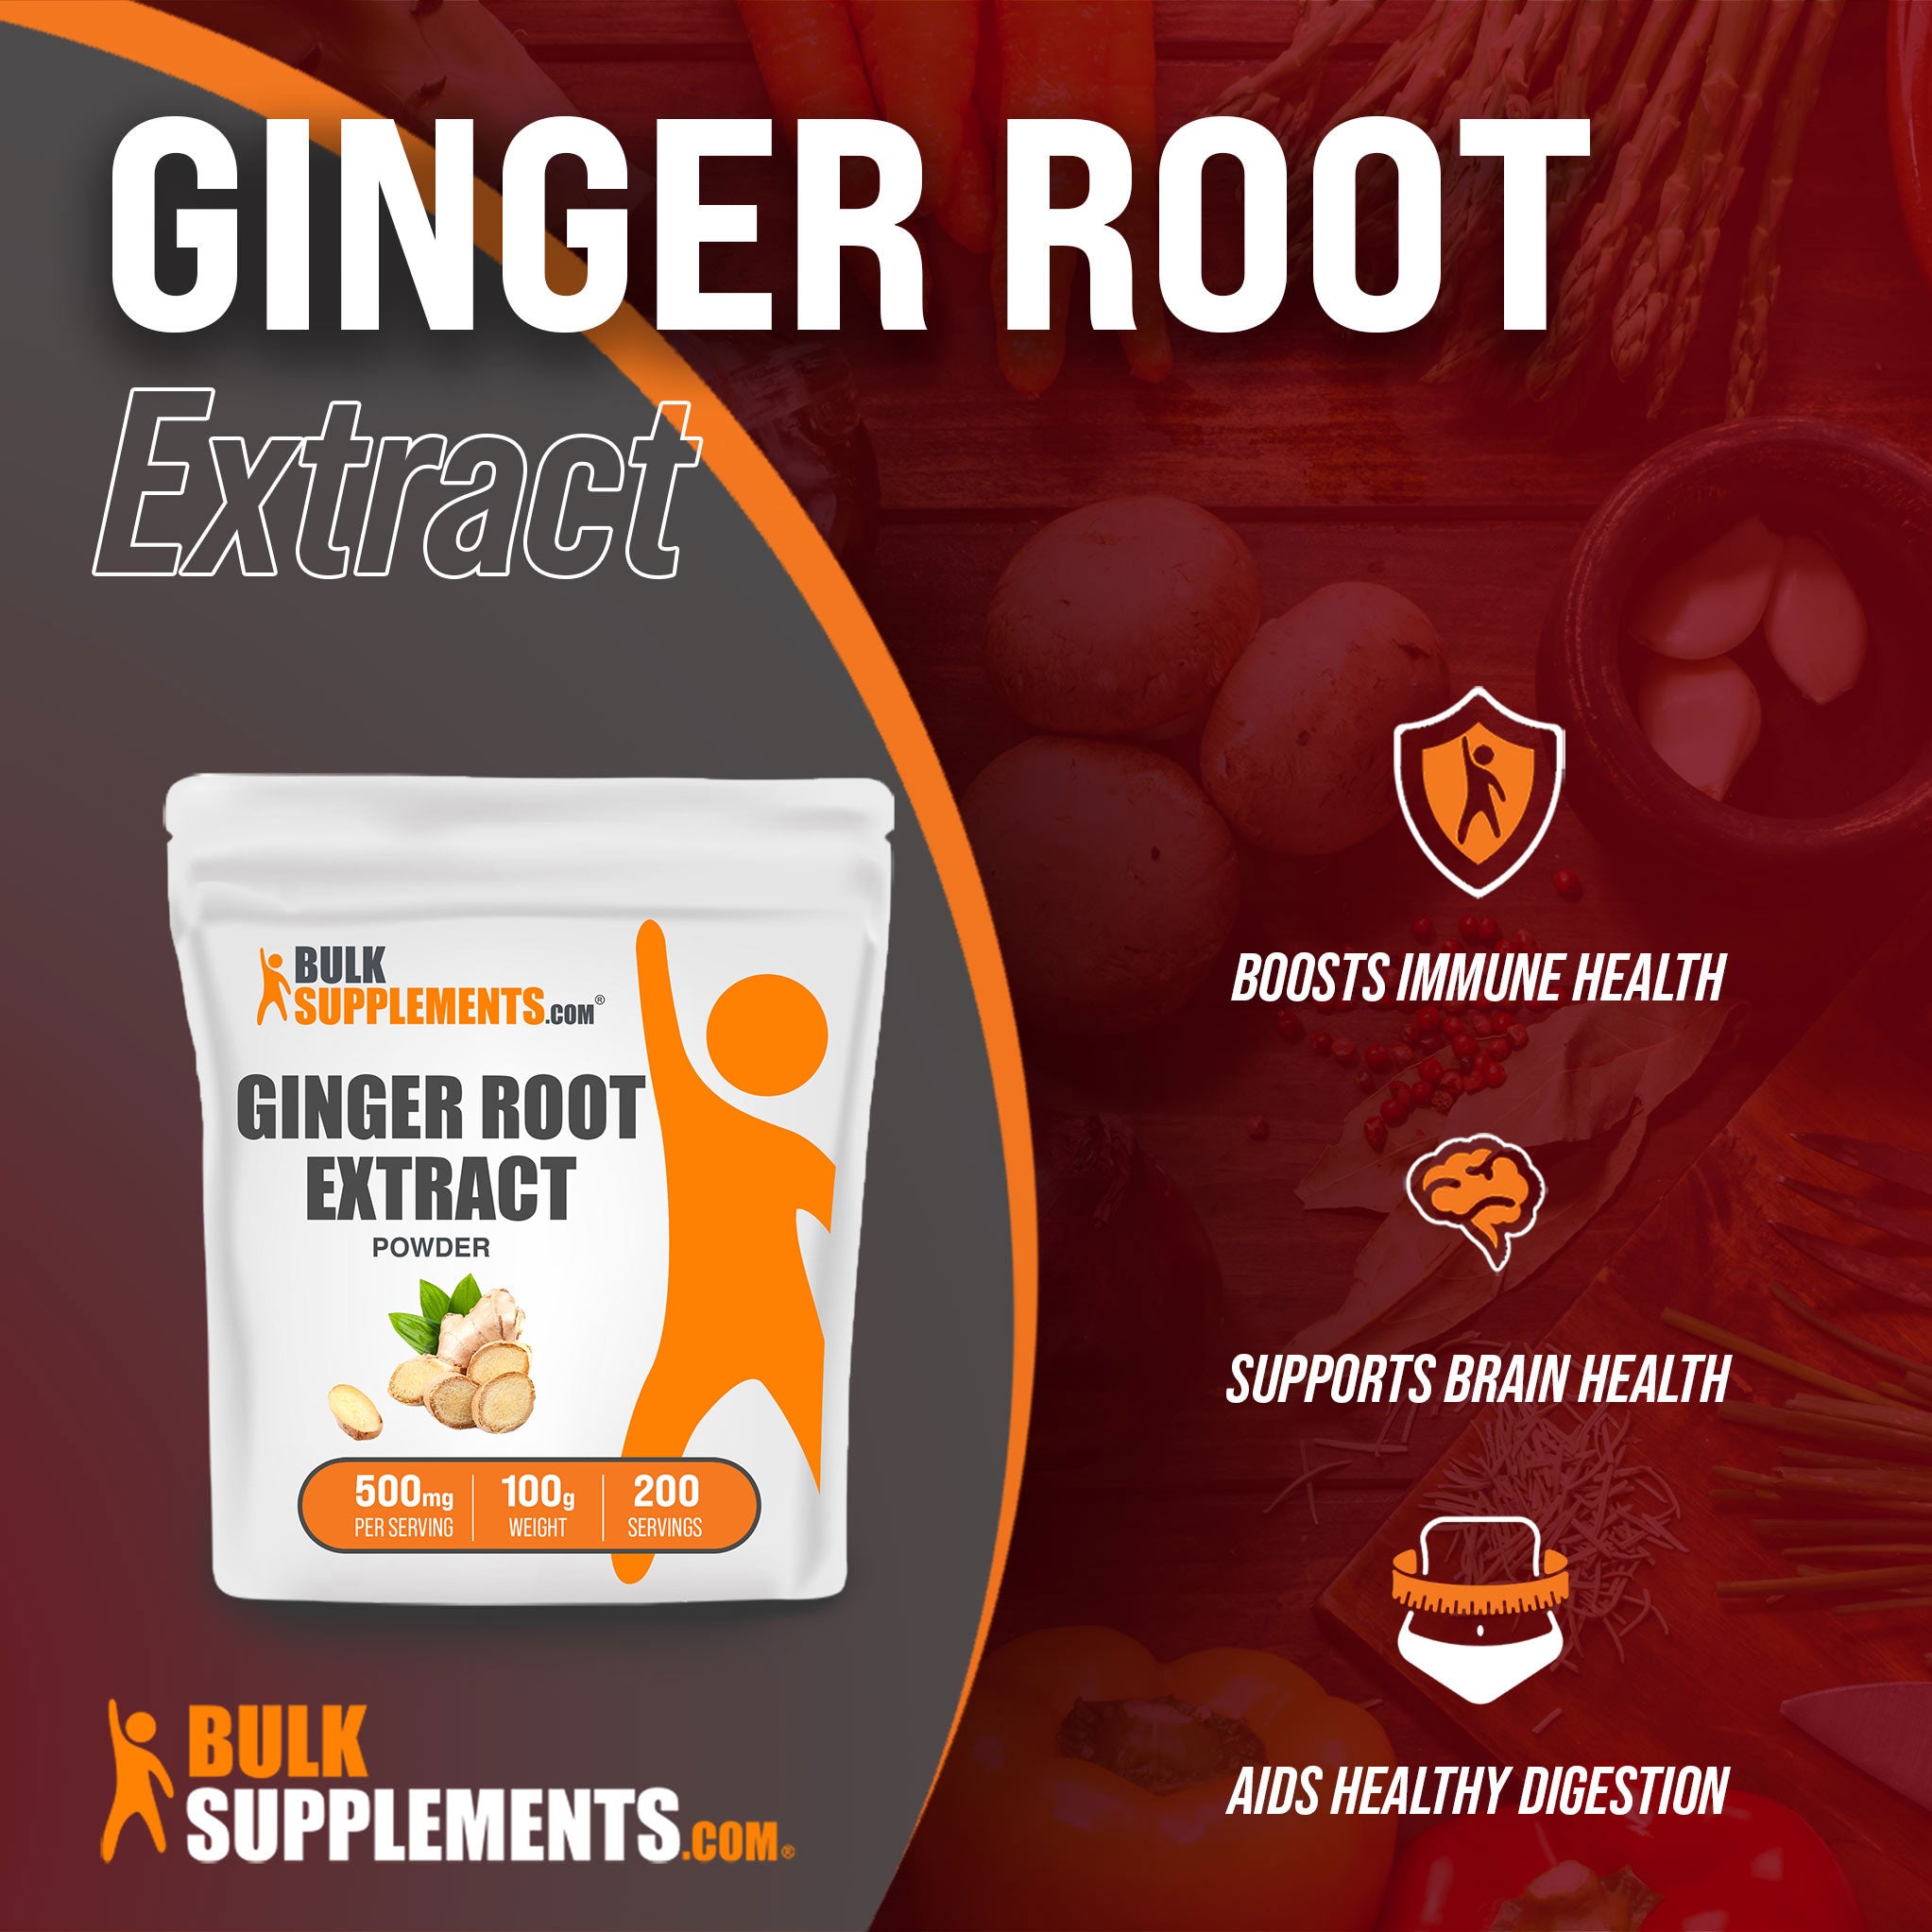 Benefits of Ginger Root Extract; boosts immune health, supports brain health, aids healthy digestion